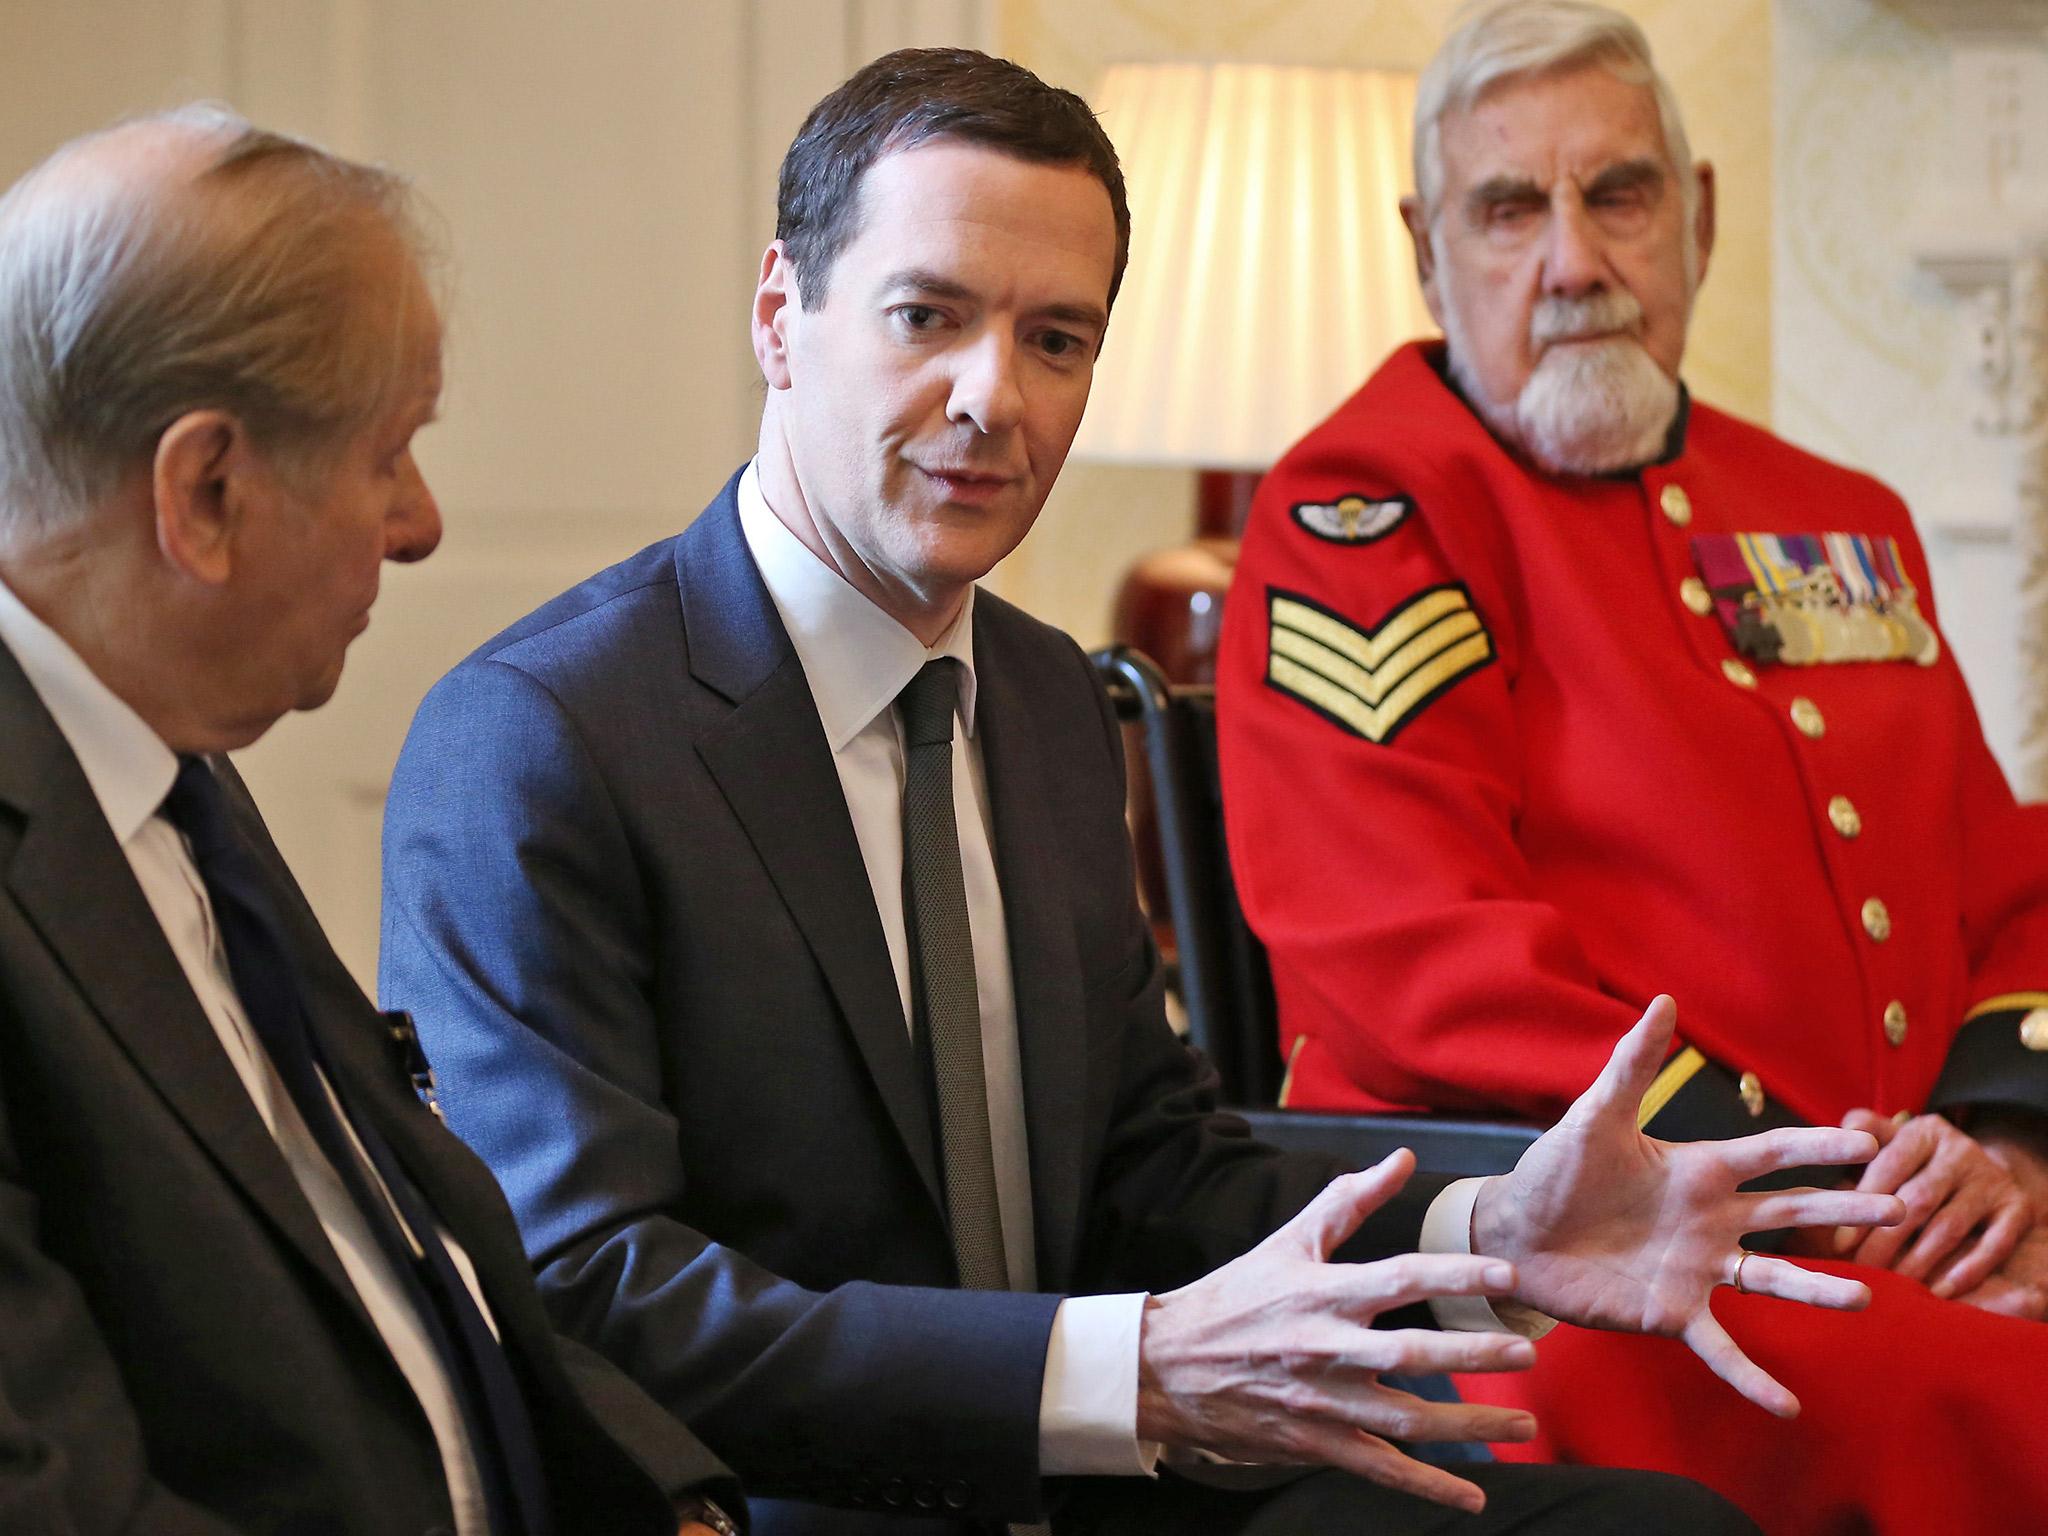 Osborne's pension reforms have created confusion